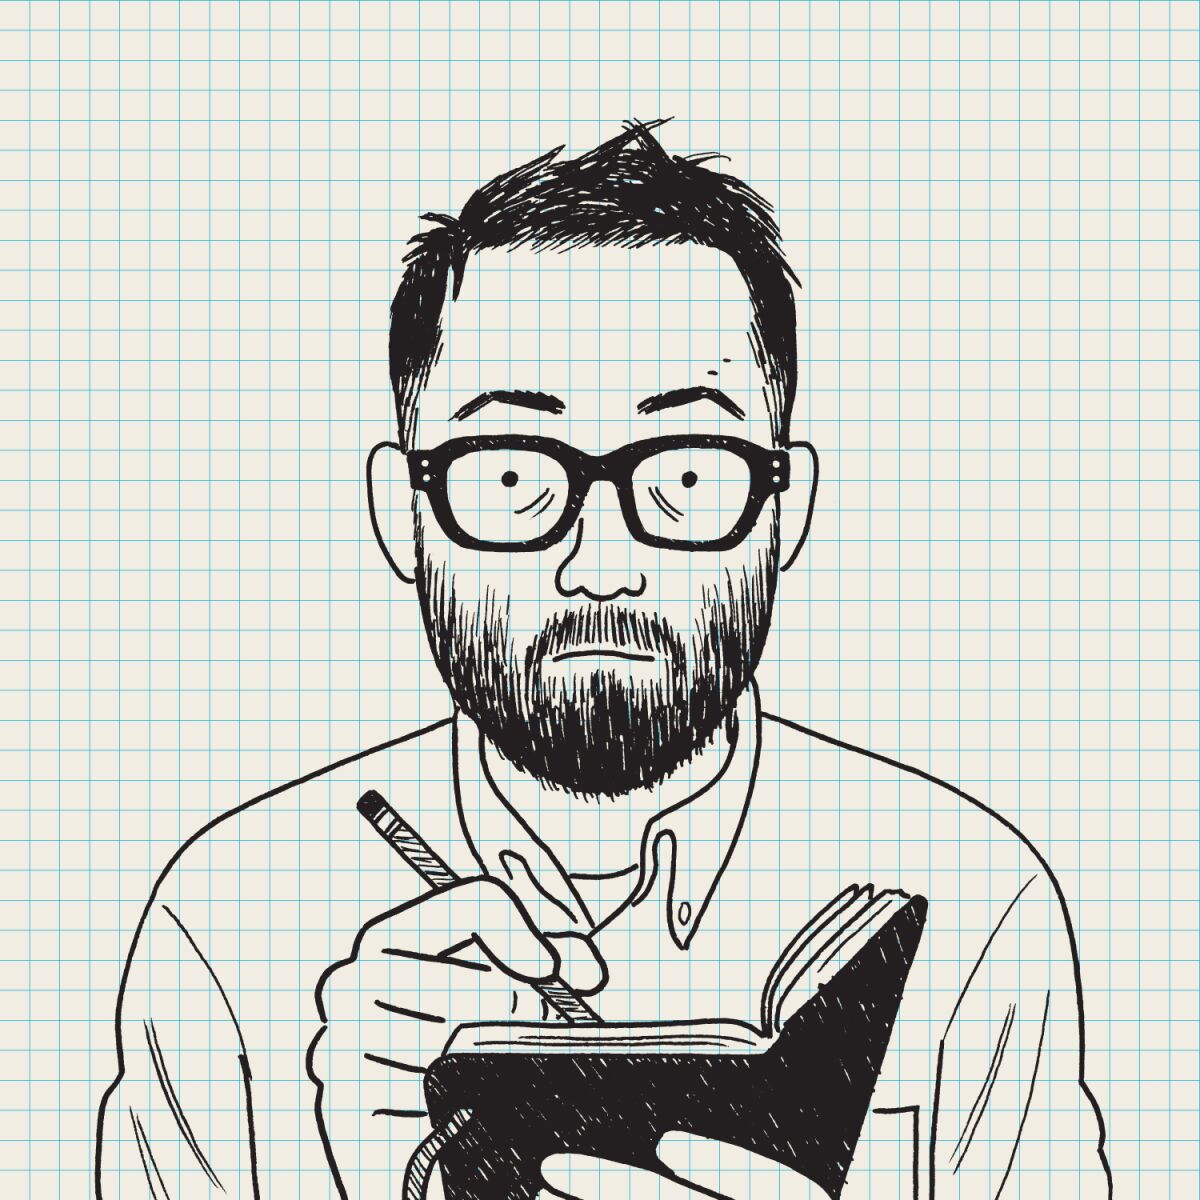 Self-portrait of Adrian Tomine for "The Loneliness of the Long-Distance Cartoonist."